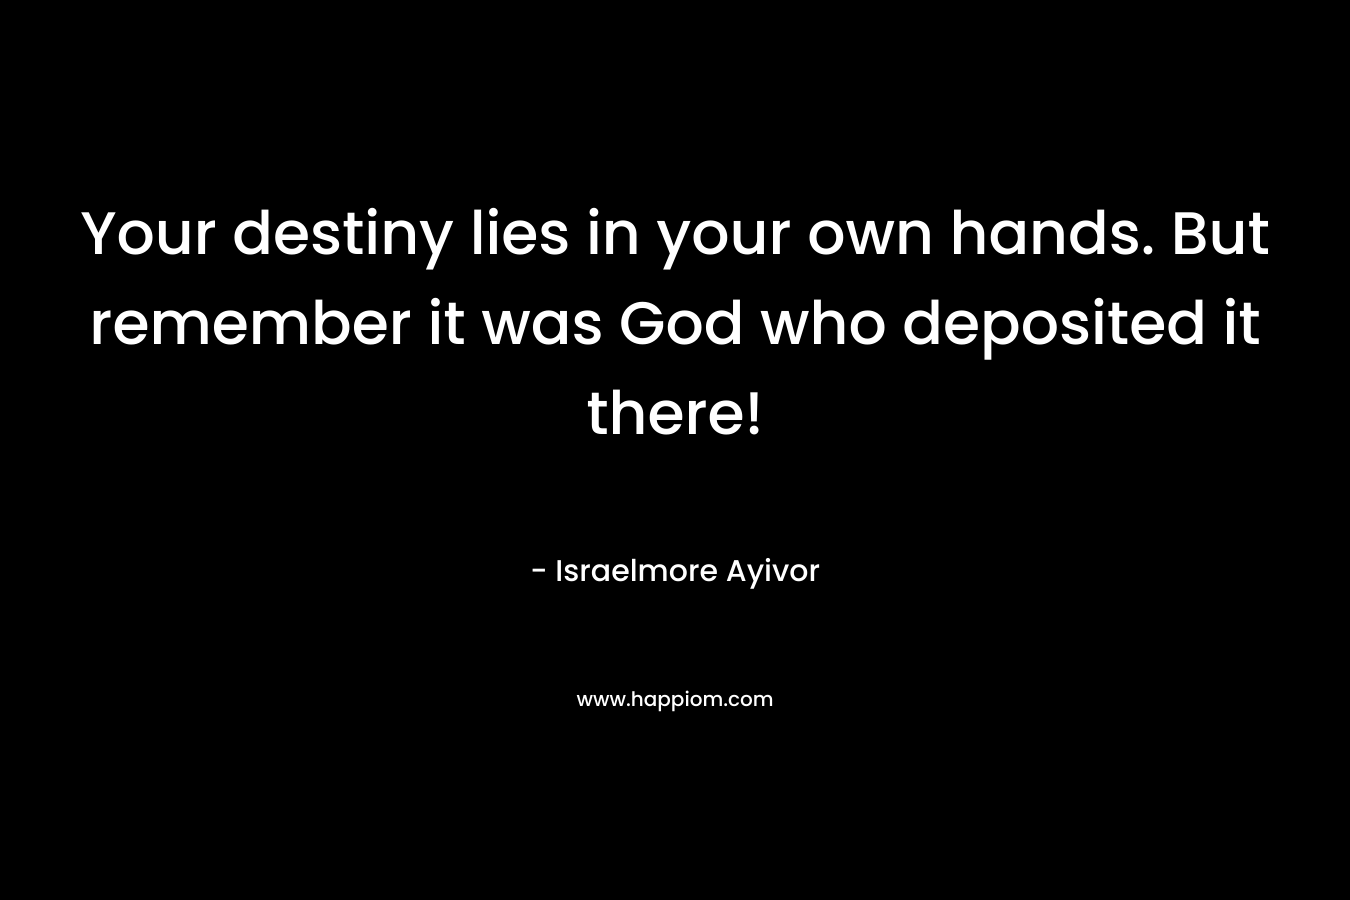 Your destiny lies in your own hands. But remember it was God who deposited it there!